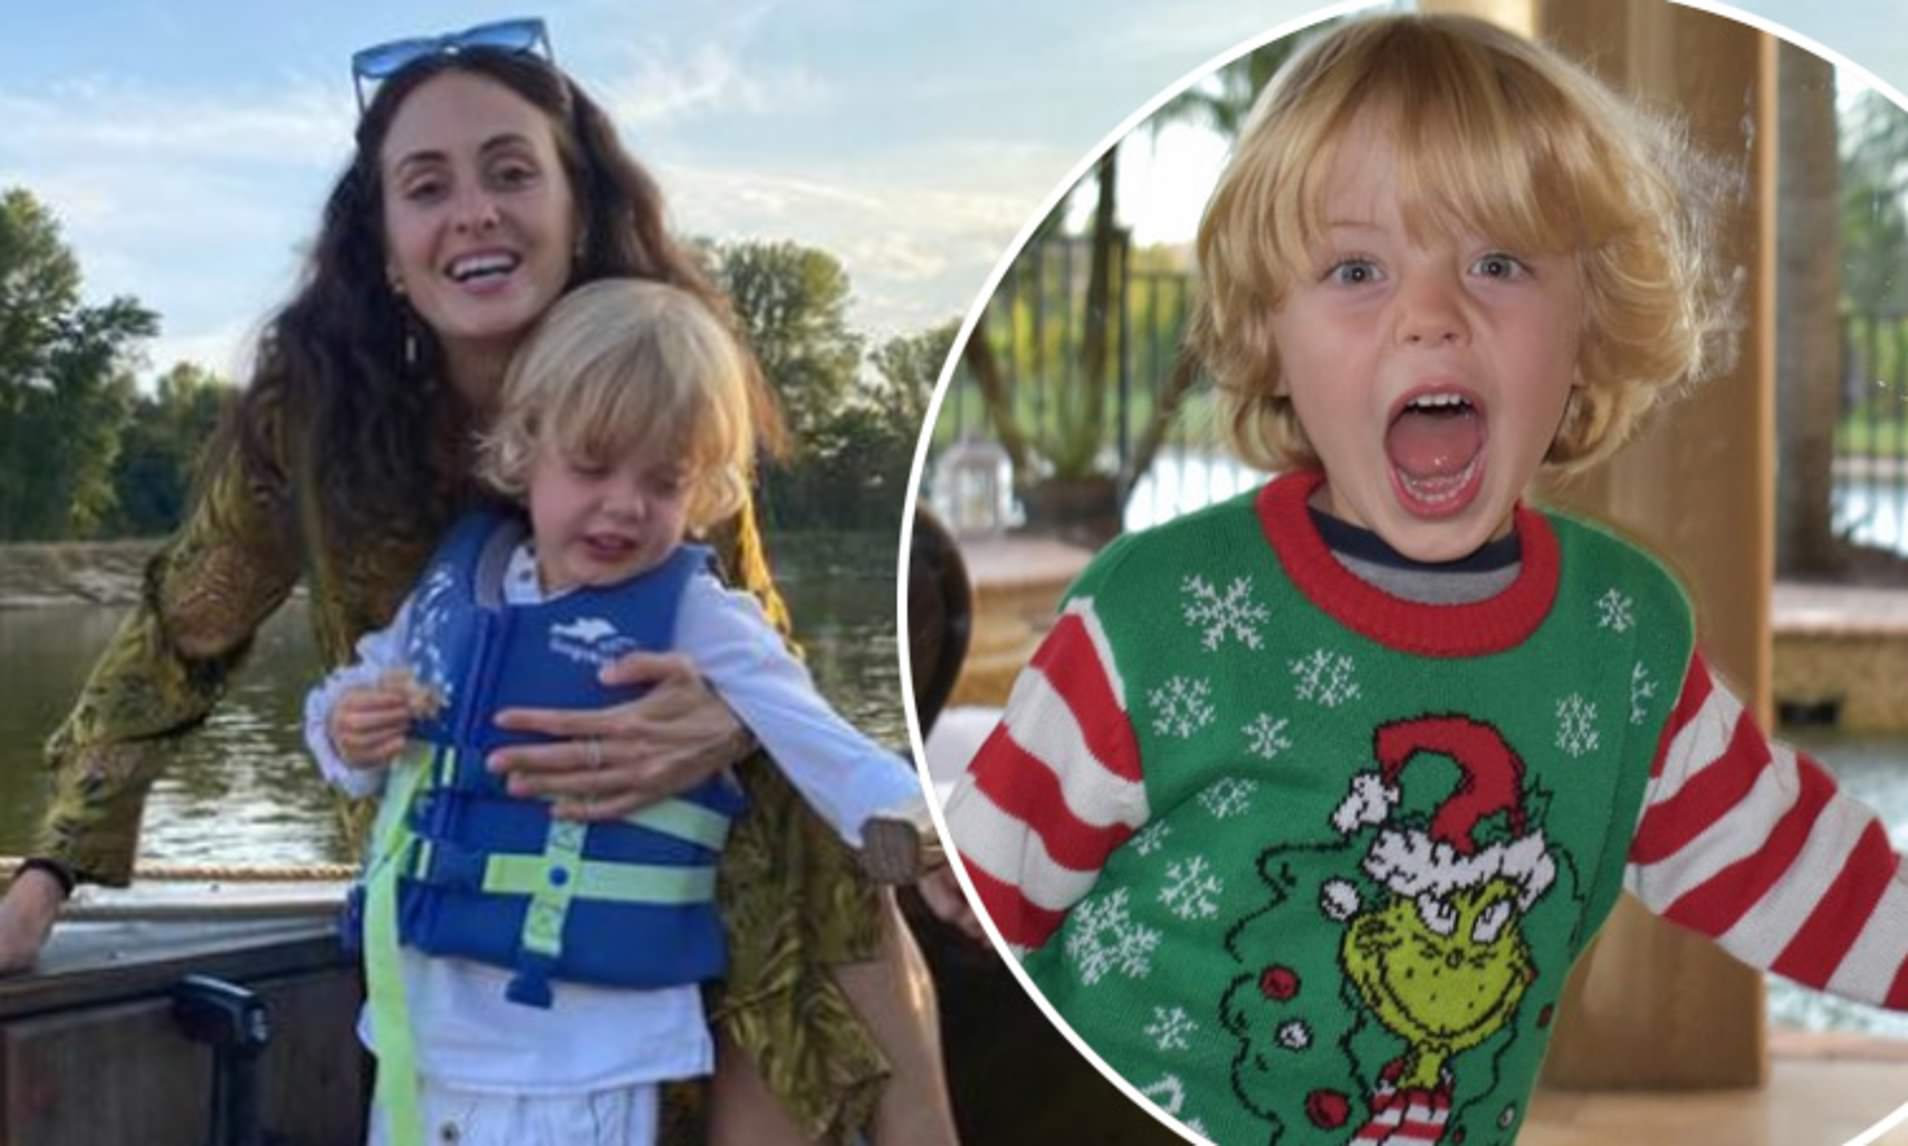 Mick Jagger's girlfriend Melanie Hamrick shares sweet snaps of son Deveraux  on his 4th birthday | Daily Mail Online